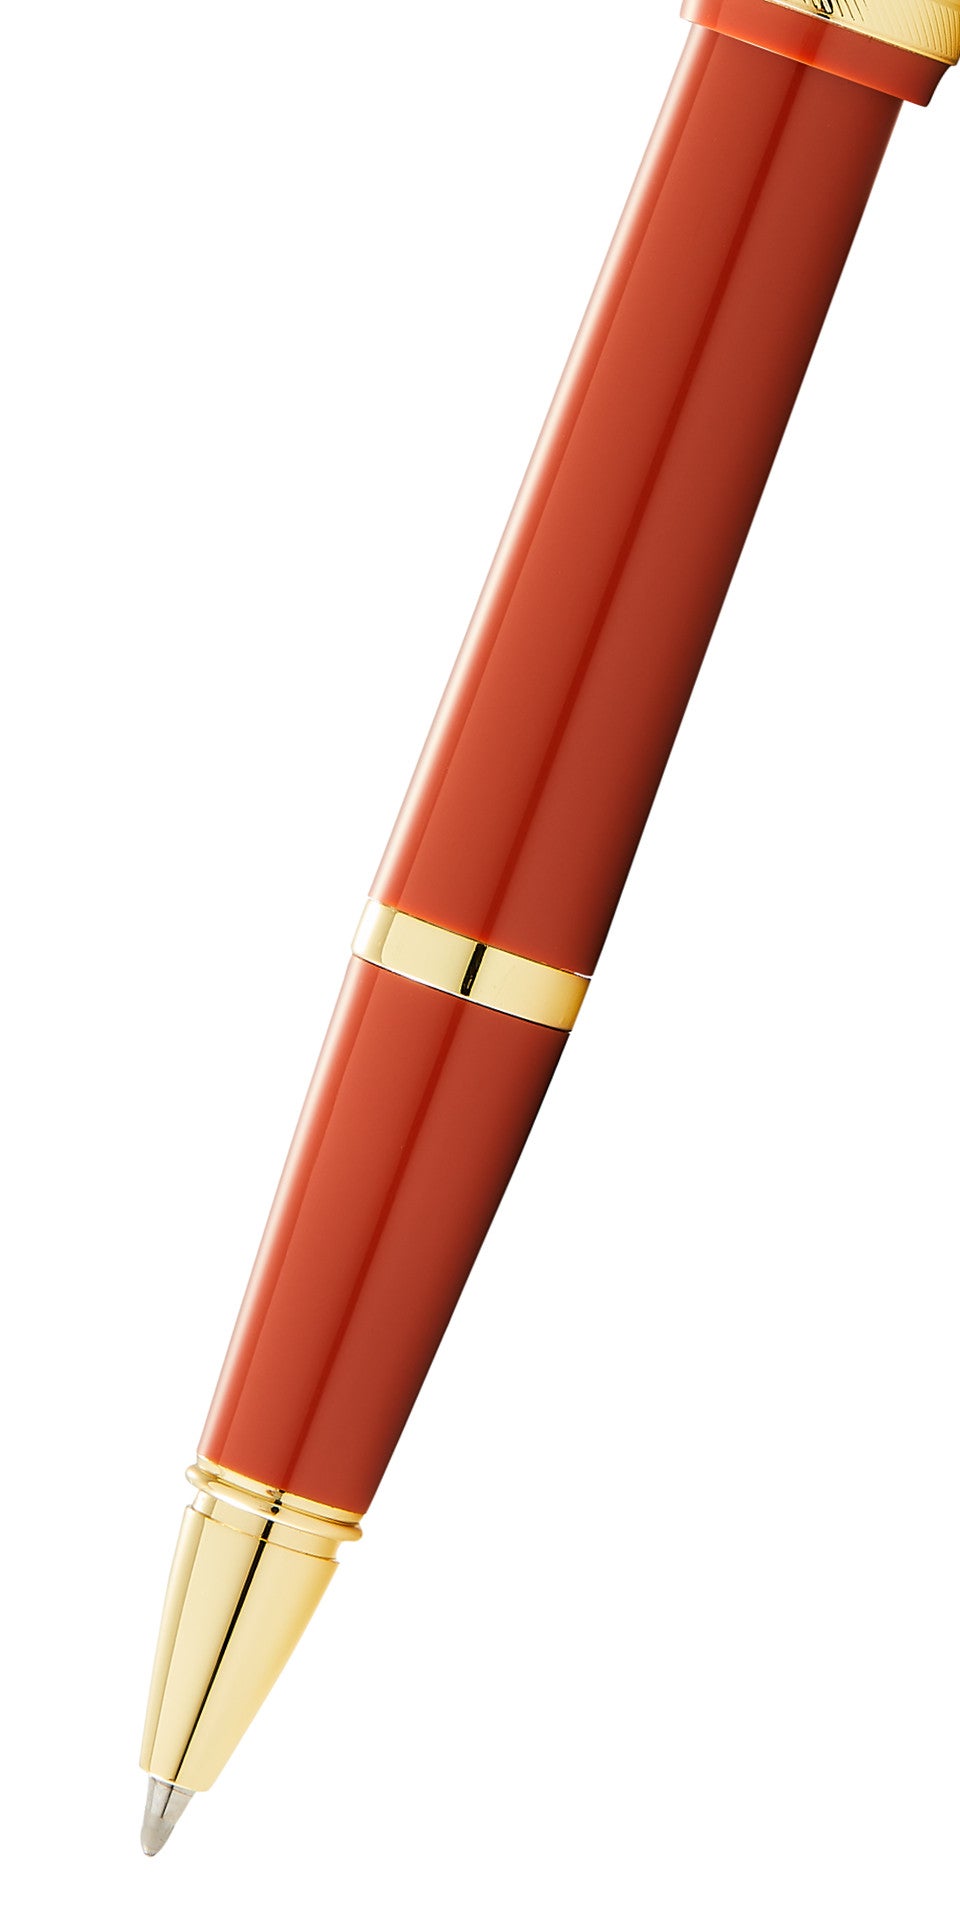 Bailey Light Polished Amber Resin and Gold Tone Rollerball Pen